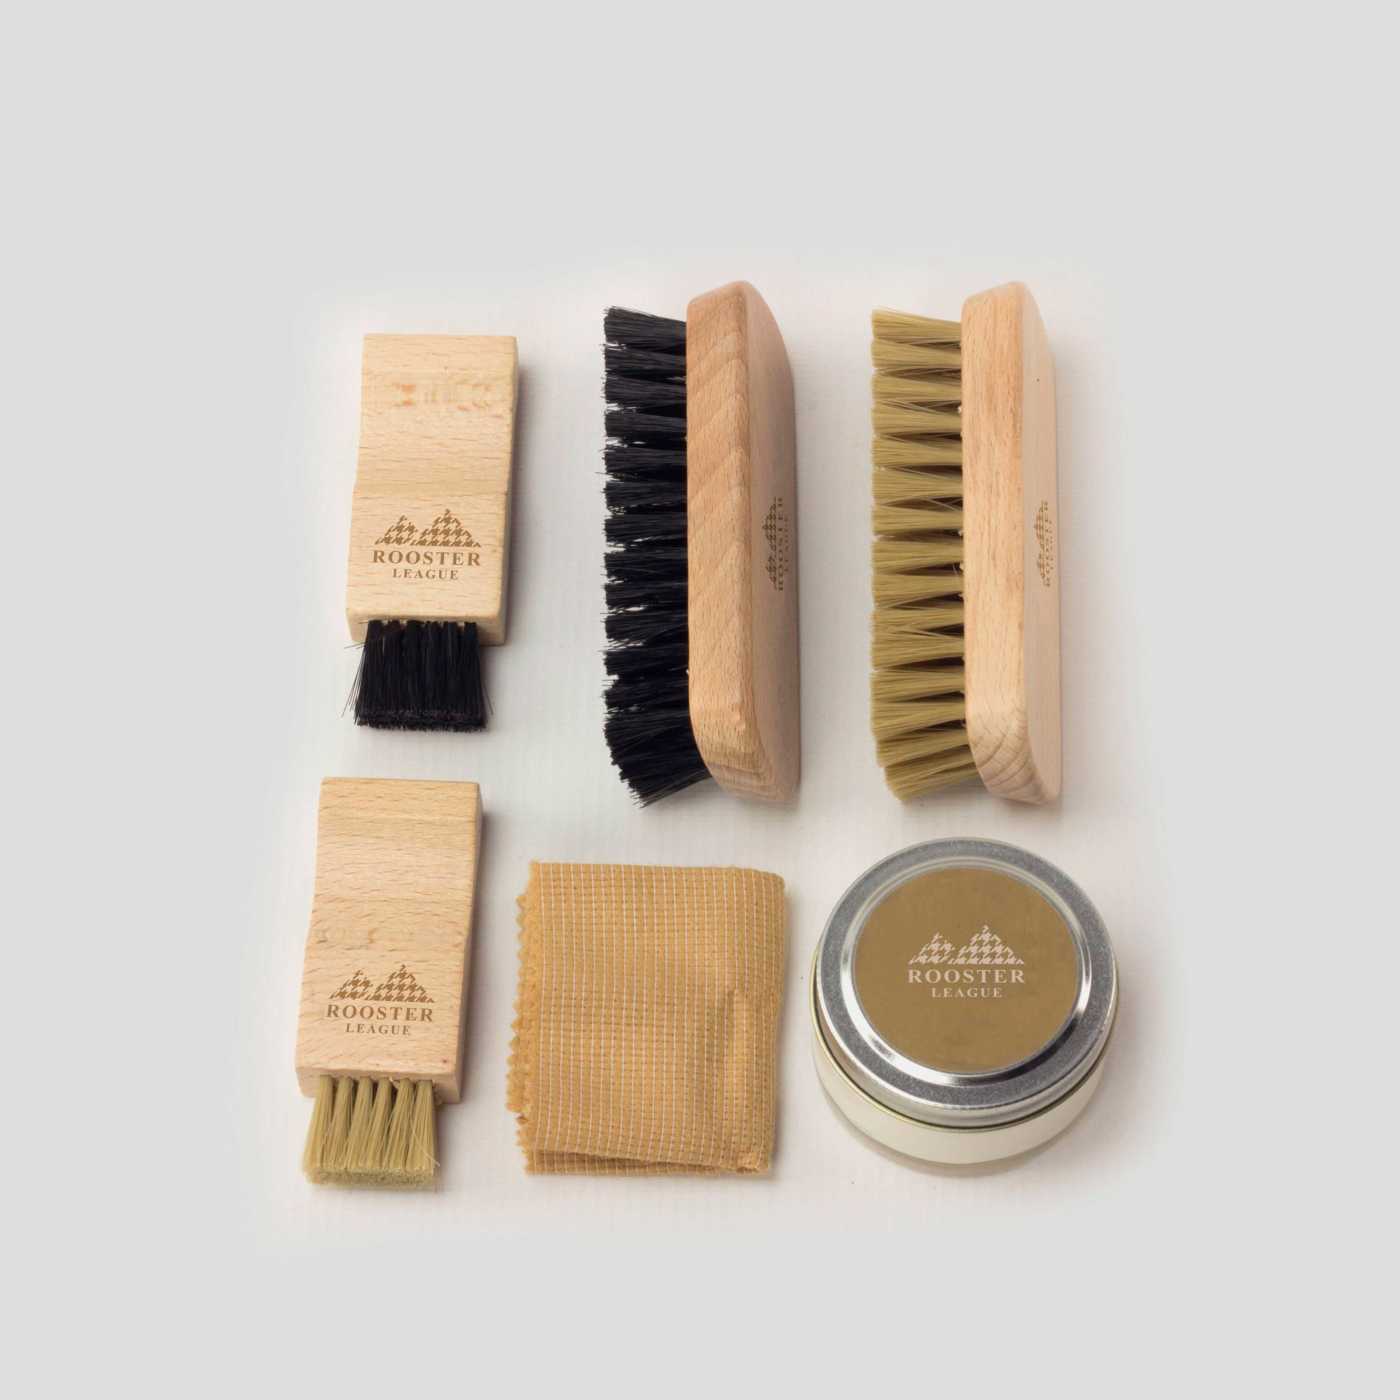 Neuken Injectie krater Shoe Care Kit for Leather - Rooster League